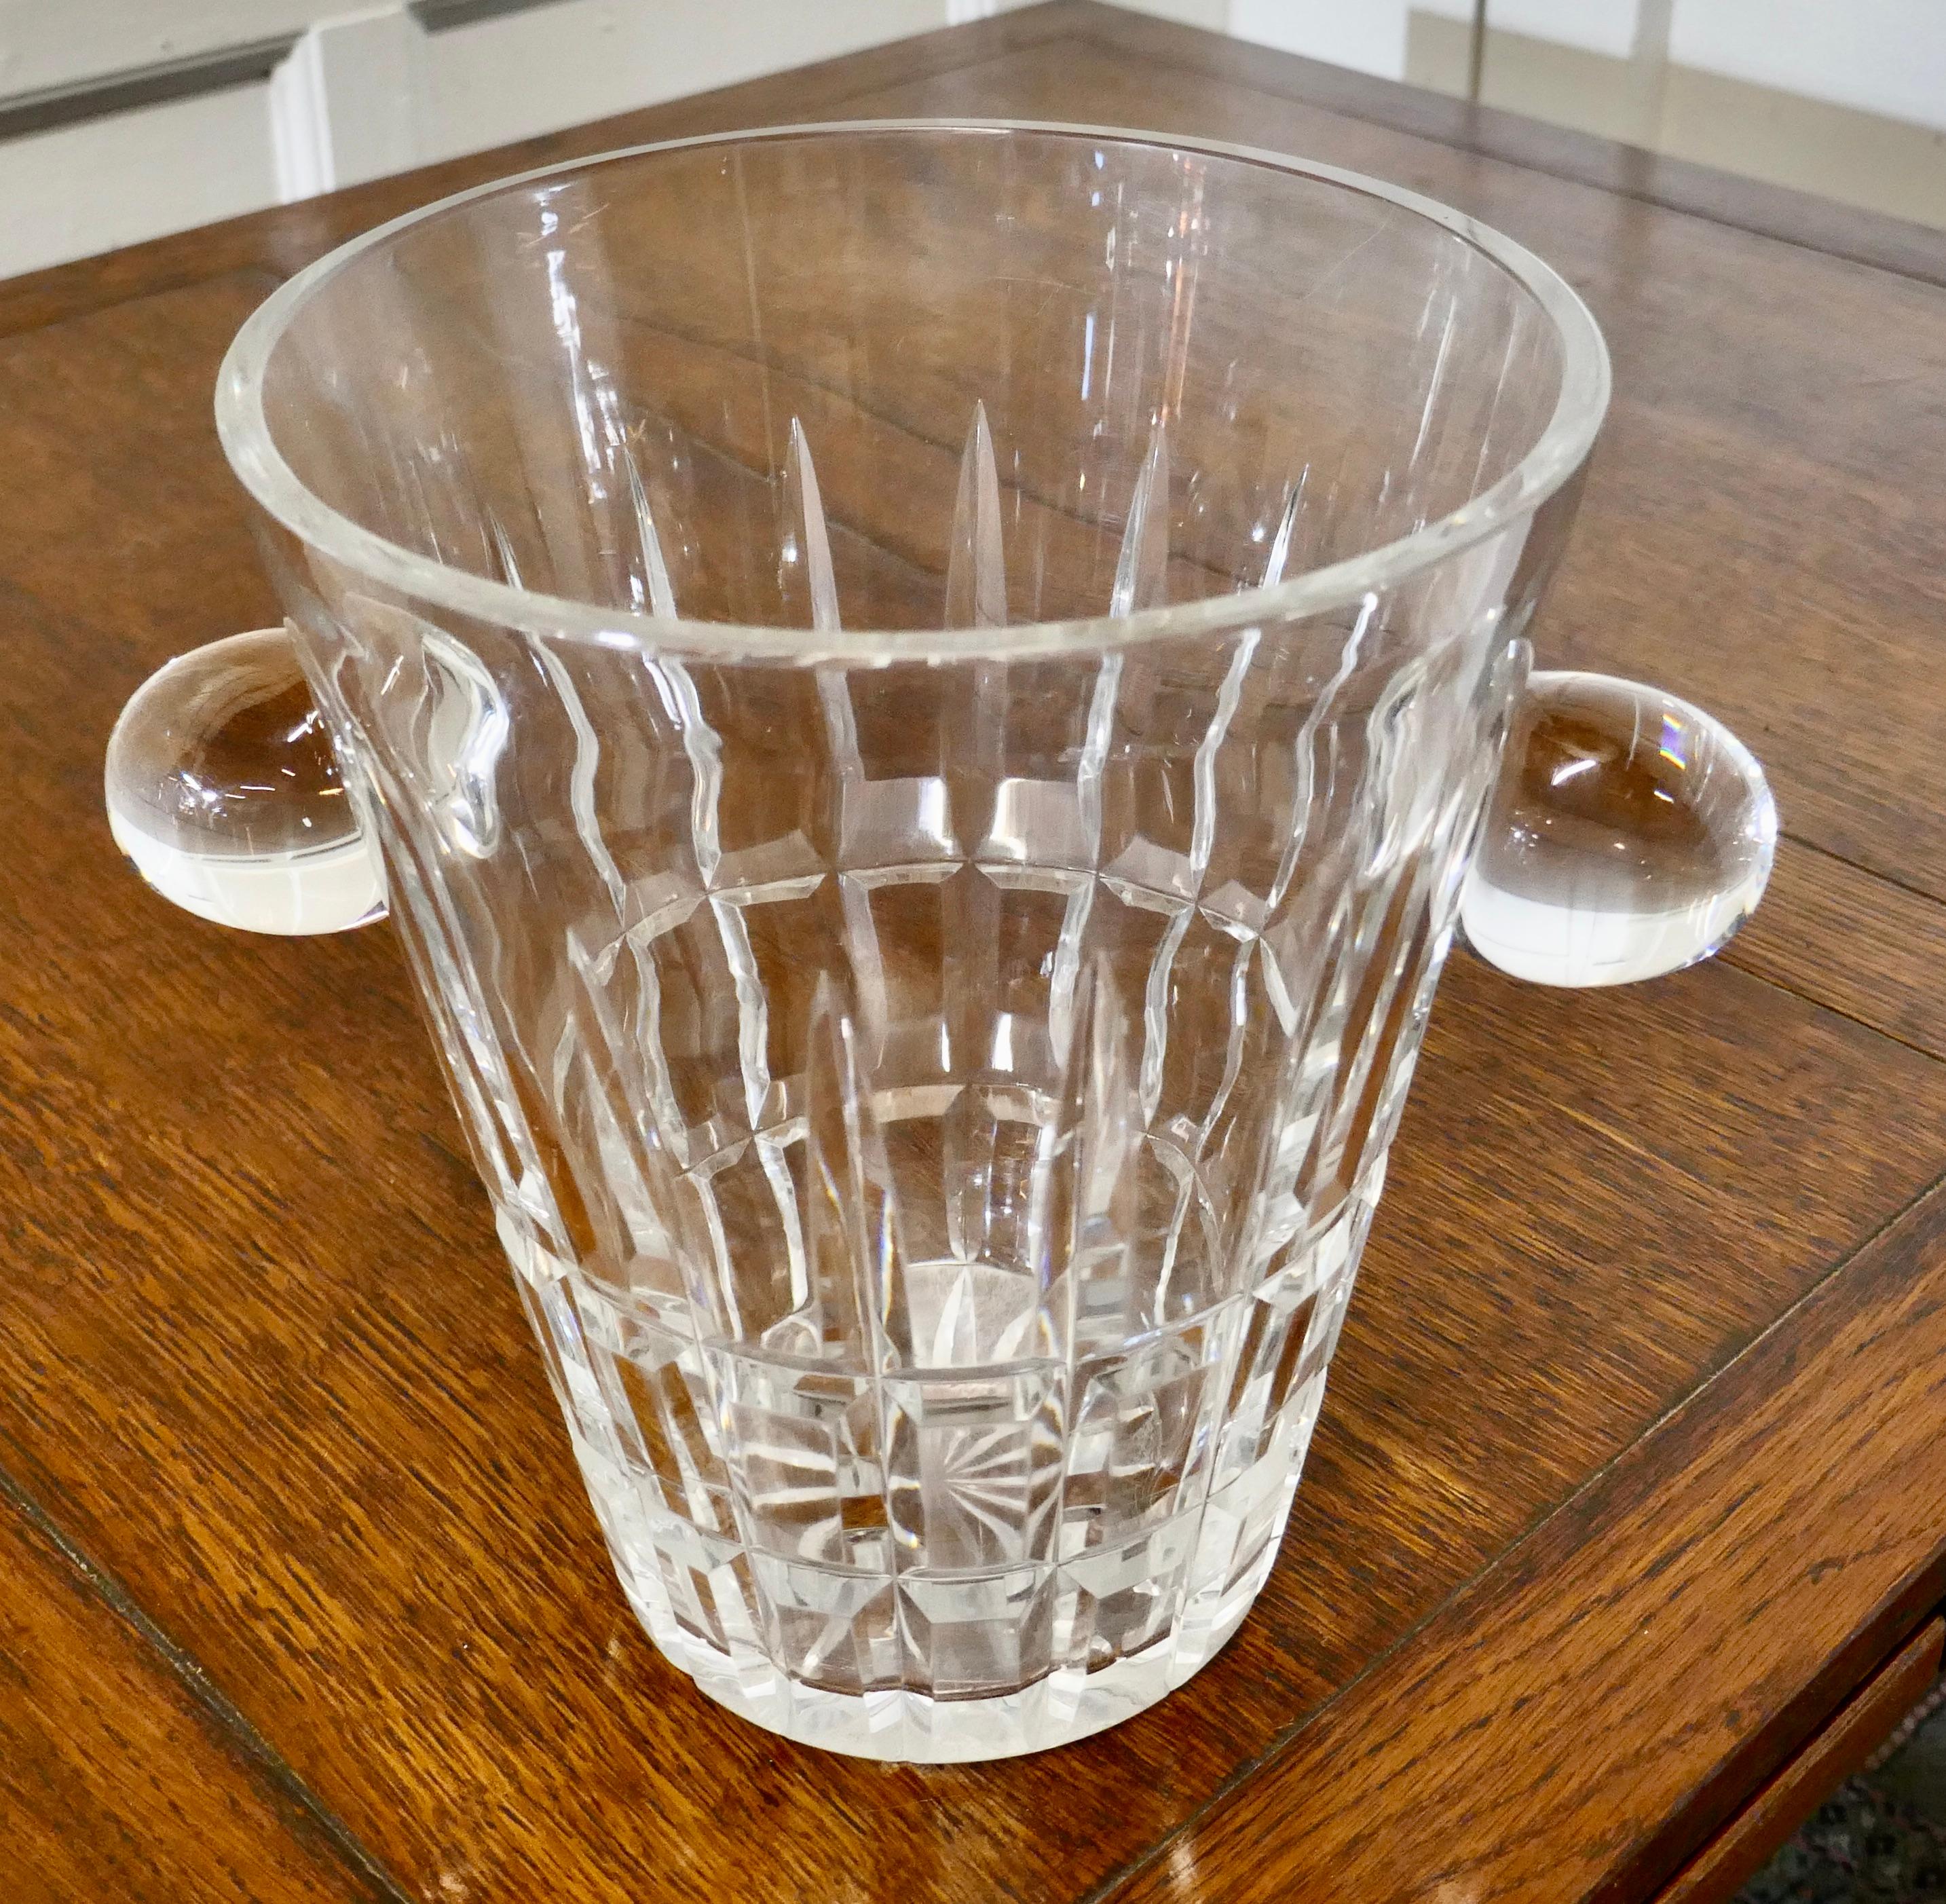 Art Deco ice bucket, hand cut French crystal wine cooler

A very stylish piece with straight elegant lines, sweeping outward at the top with chunky knob handles 

The cooler or Ice Bucket is extremely heavy, it has some scratching to the